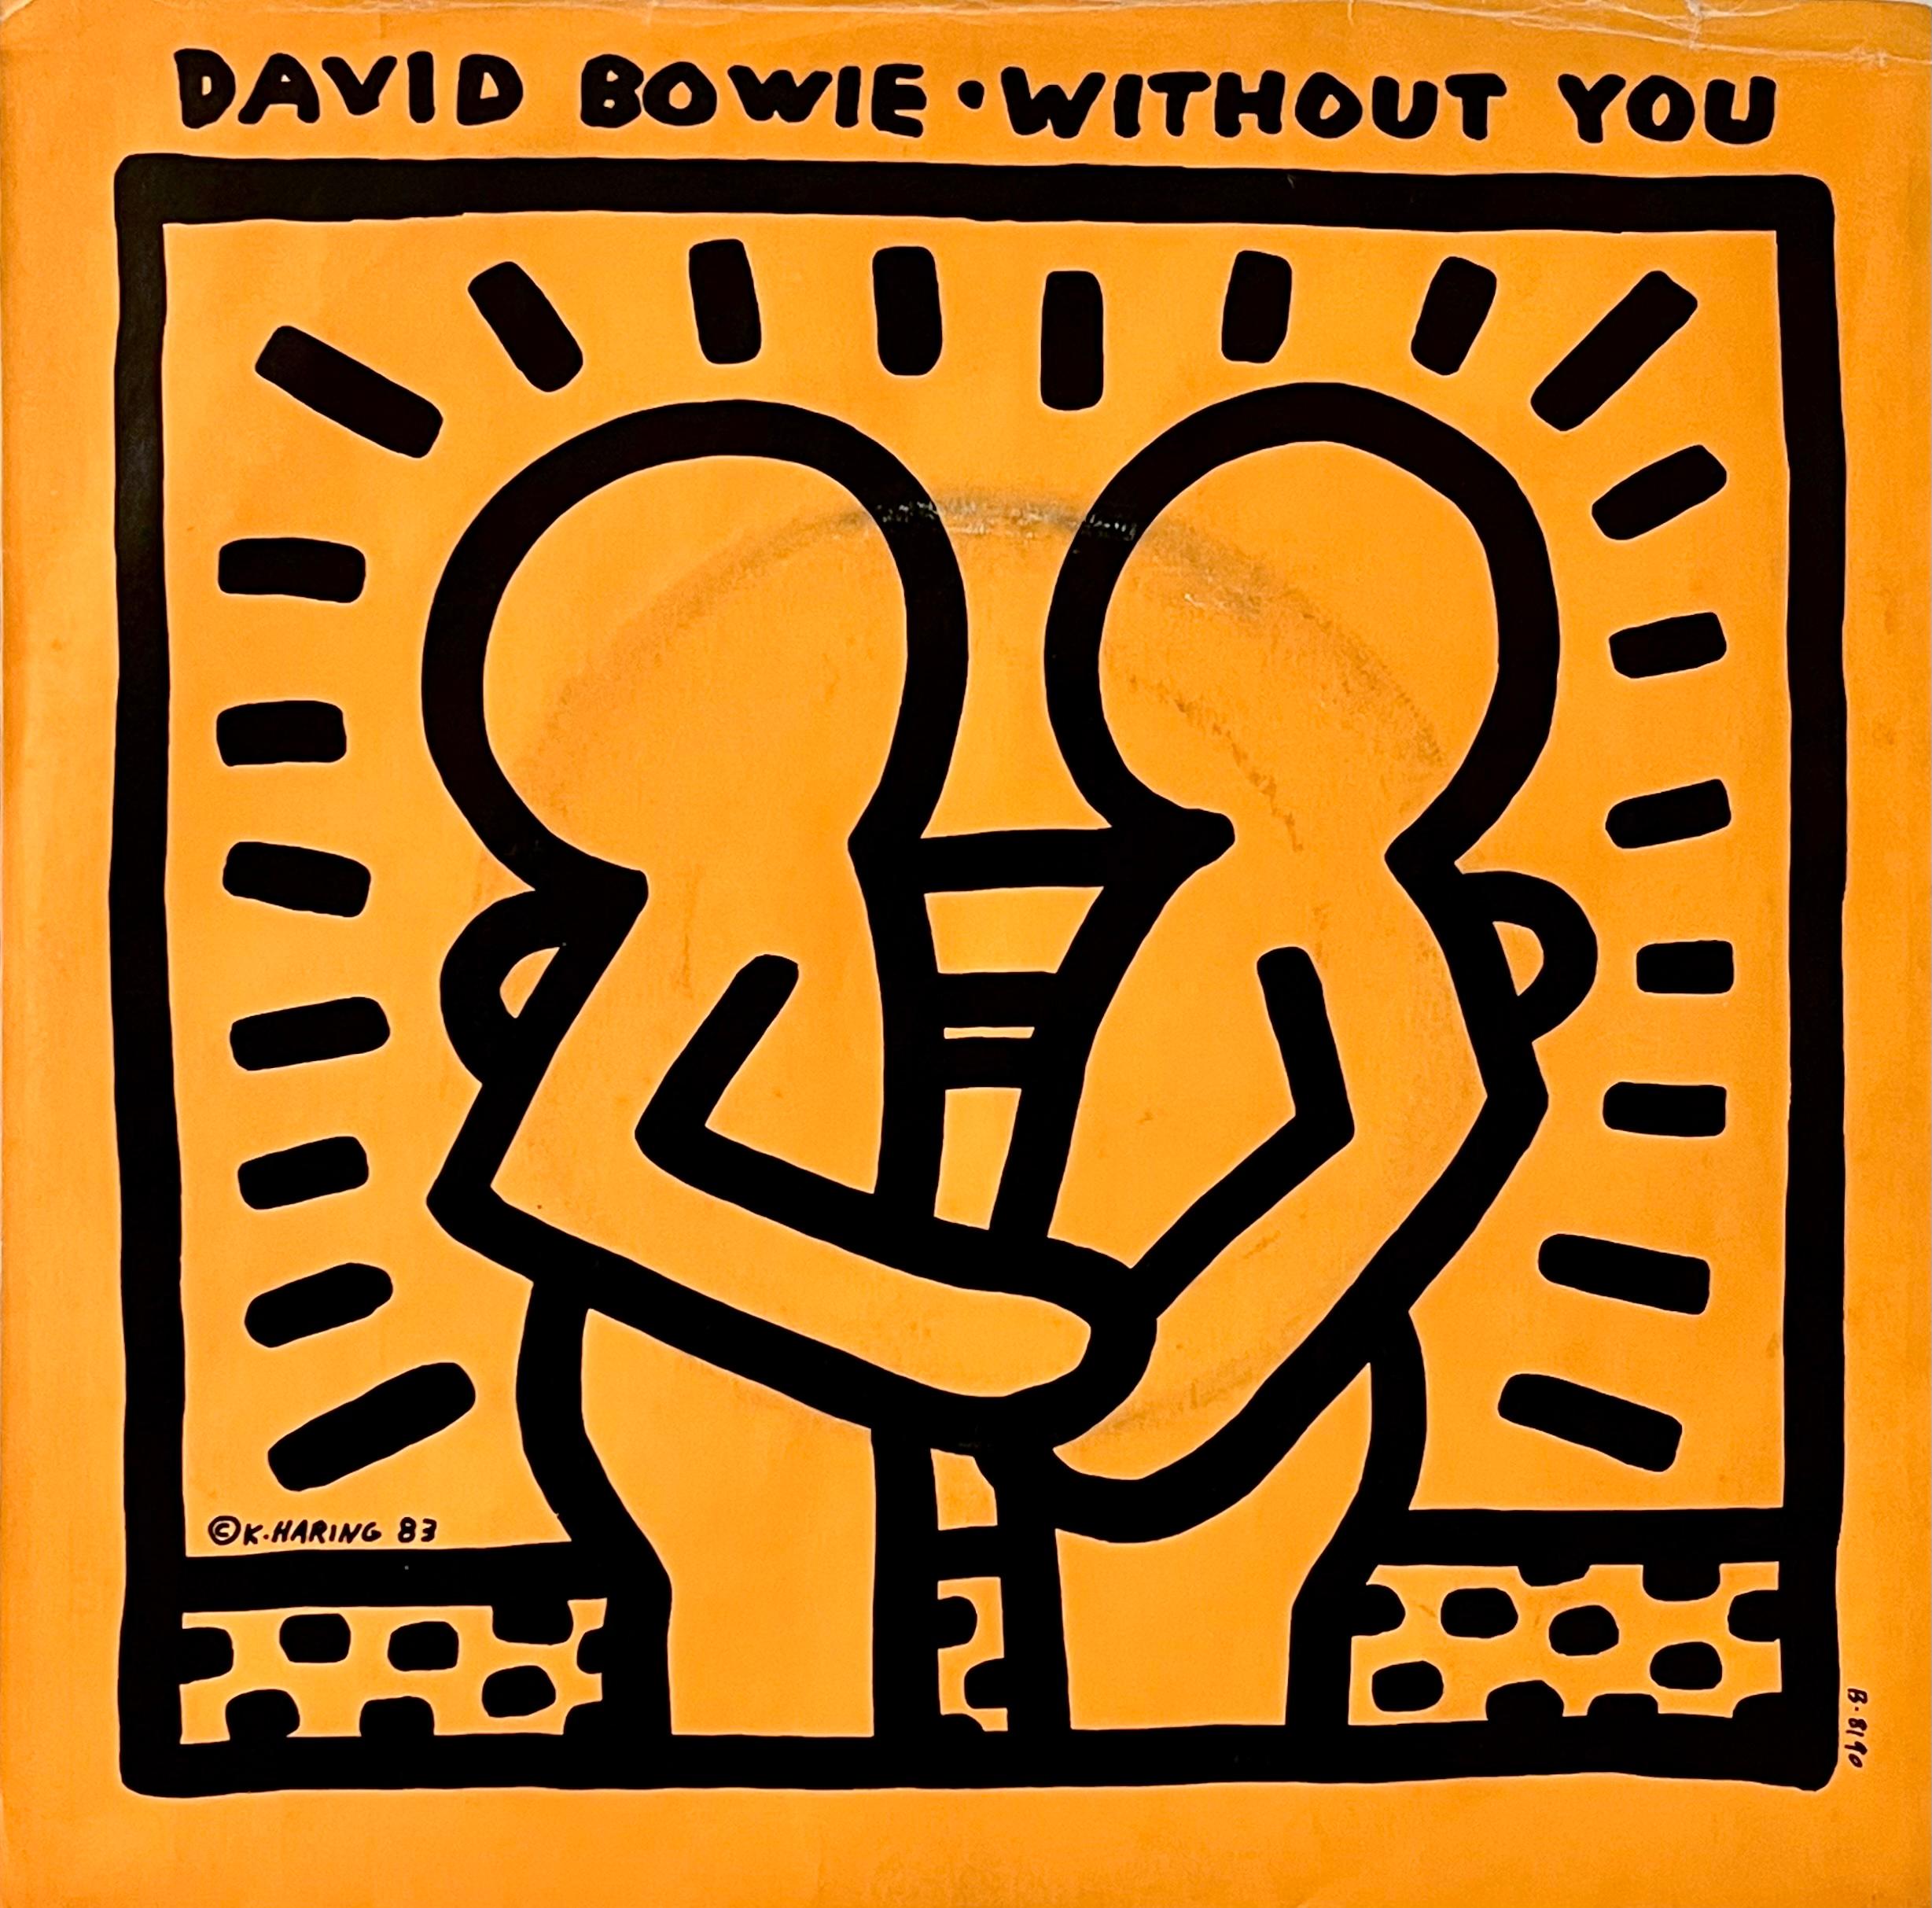 1980s Keith Haring Record Art:
David BOWIE "Without You" A Rare Highly Sought After Vinyl Art Cover featuring original cover artwork by Keith Haring.

Year: 1983.

Medium: Off-Set Lithograph.

Dimensions: 7 x 7 inches.

Cover: Fair overall vintage